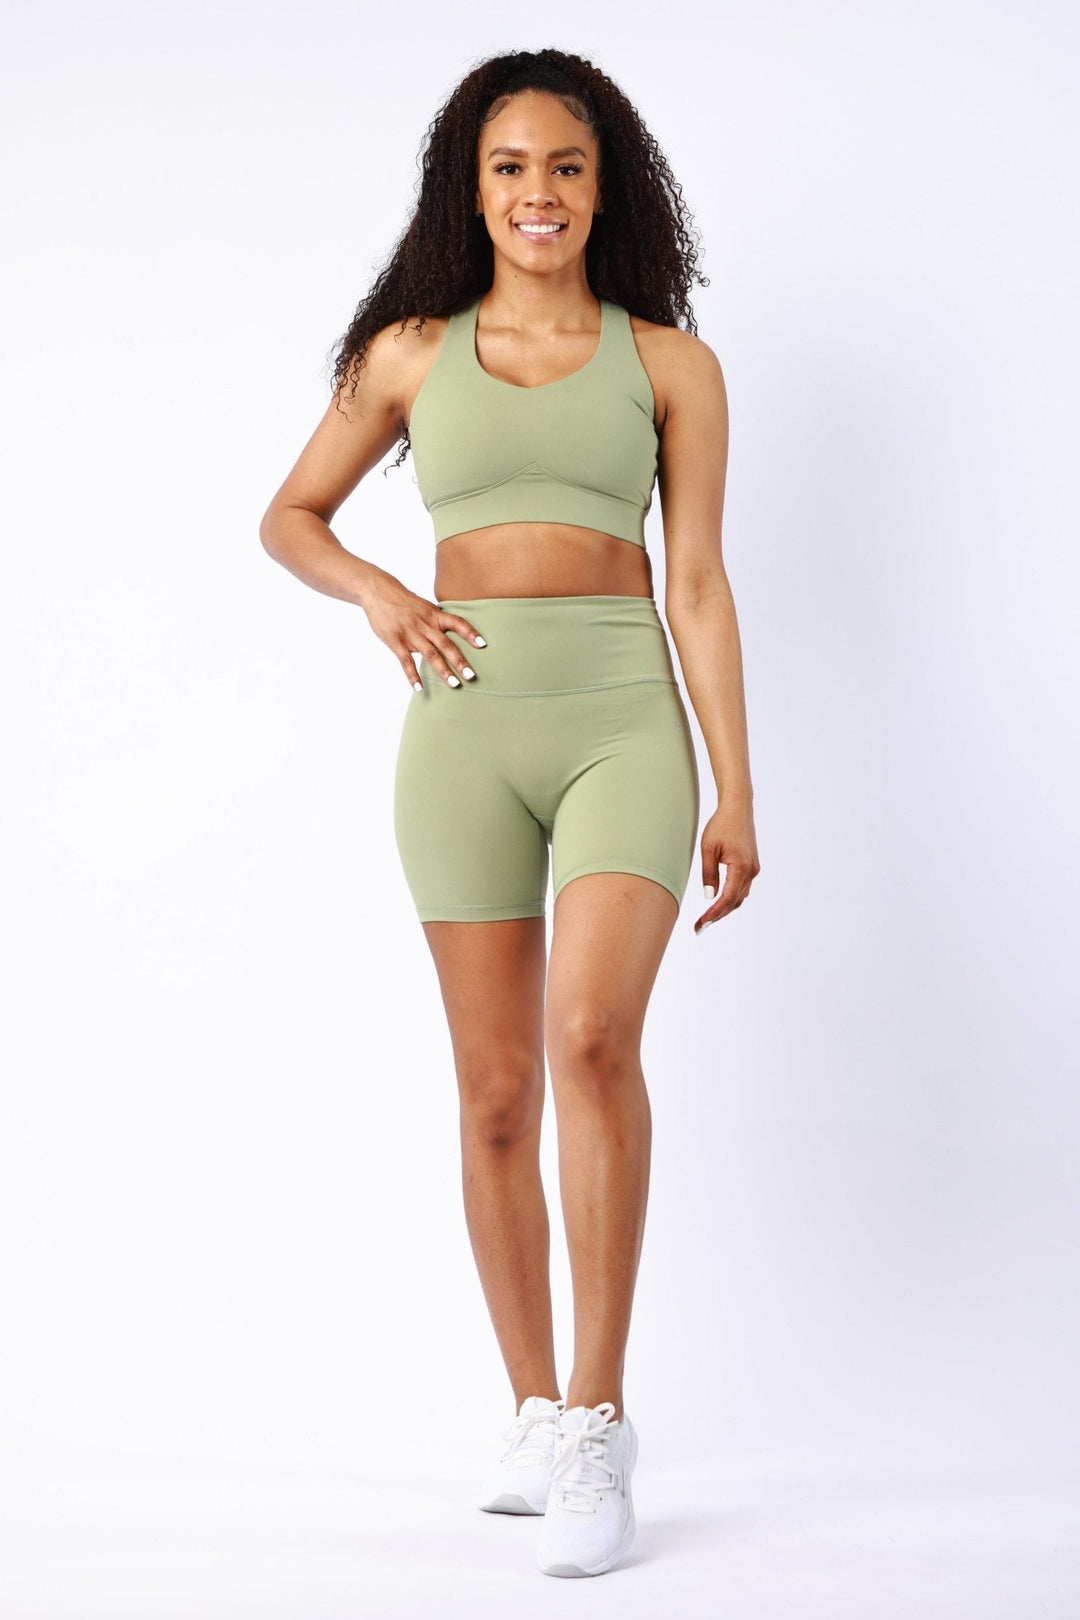 Athletic Women's Shorts With No Pockets In Oil Green - attivousa Free Shipping over $75 Womens Activewear Attivo